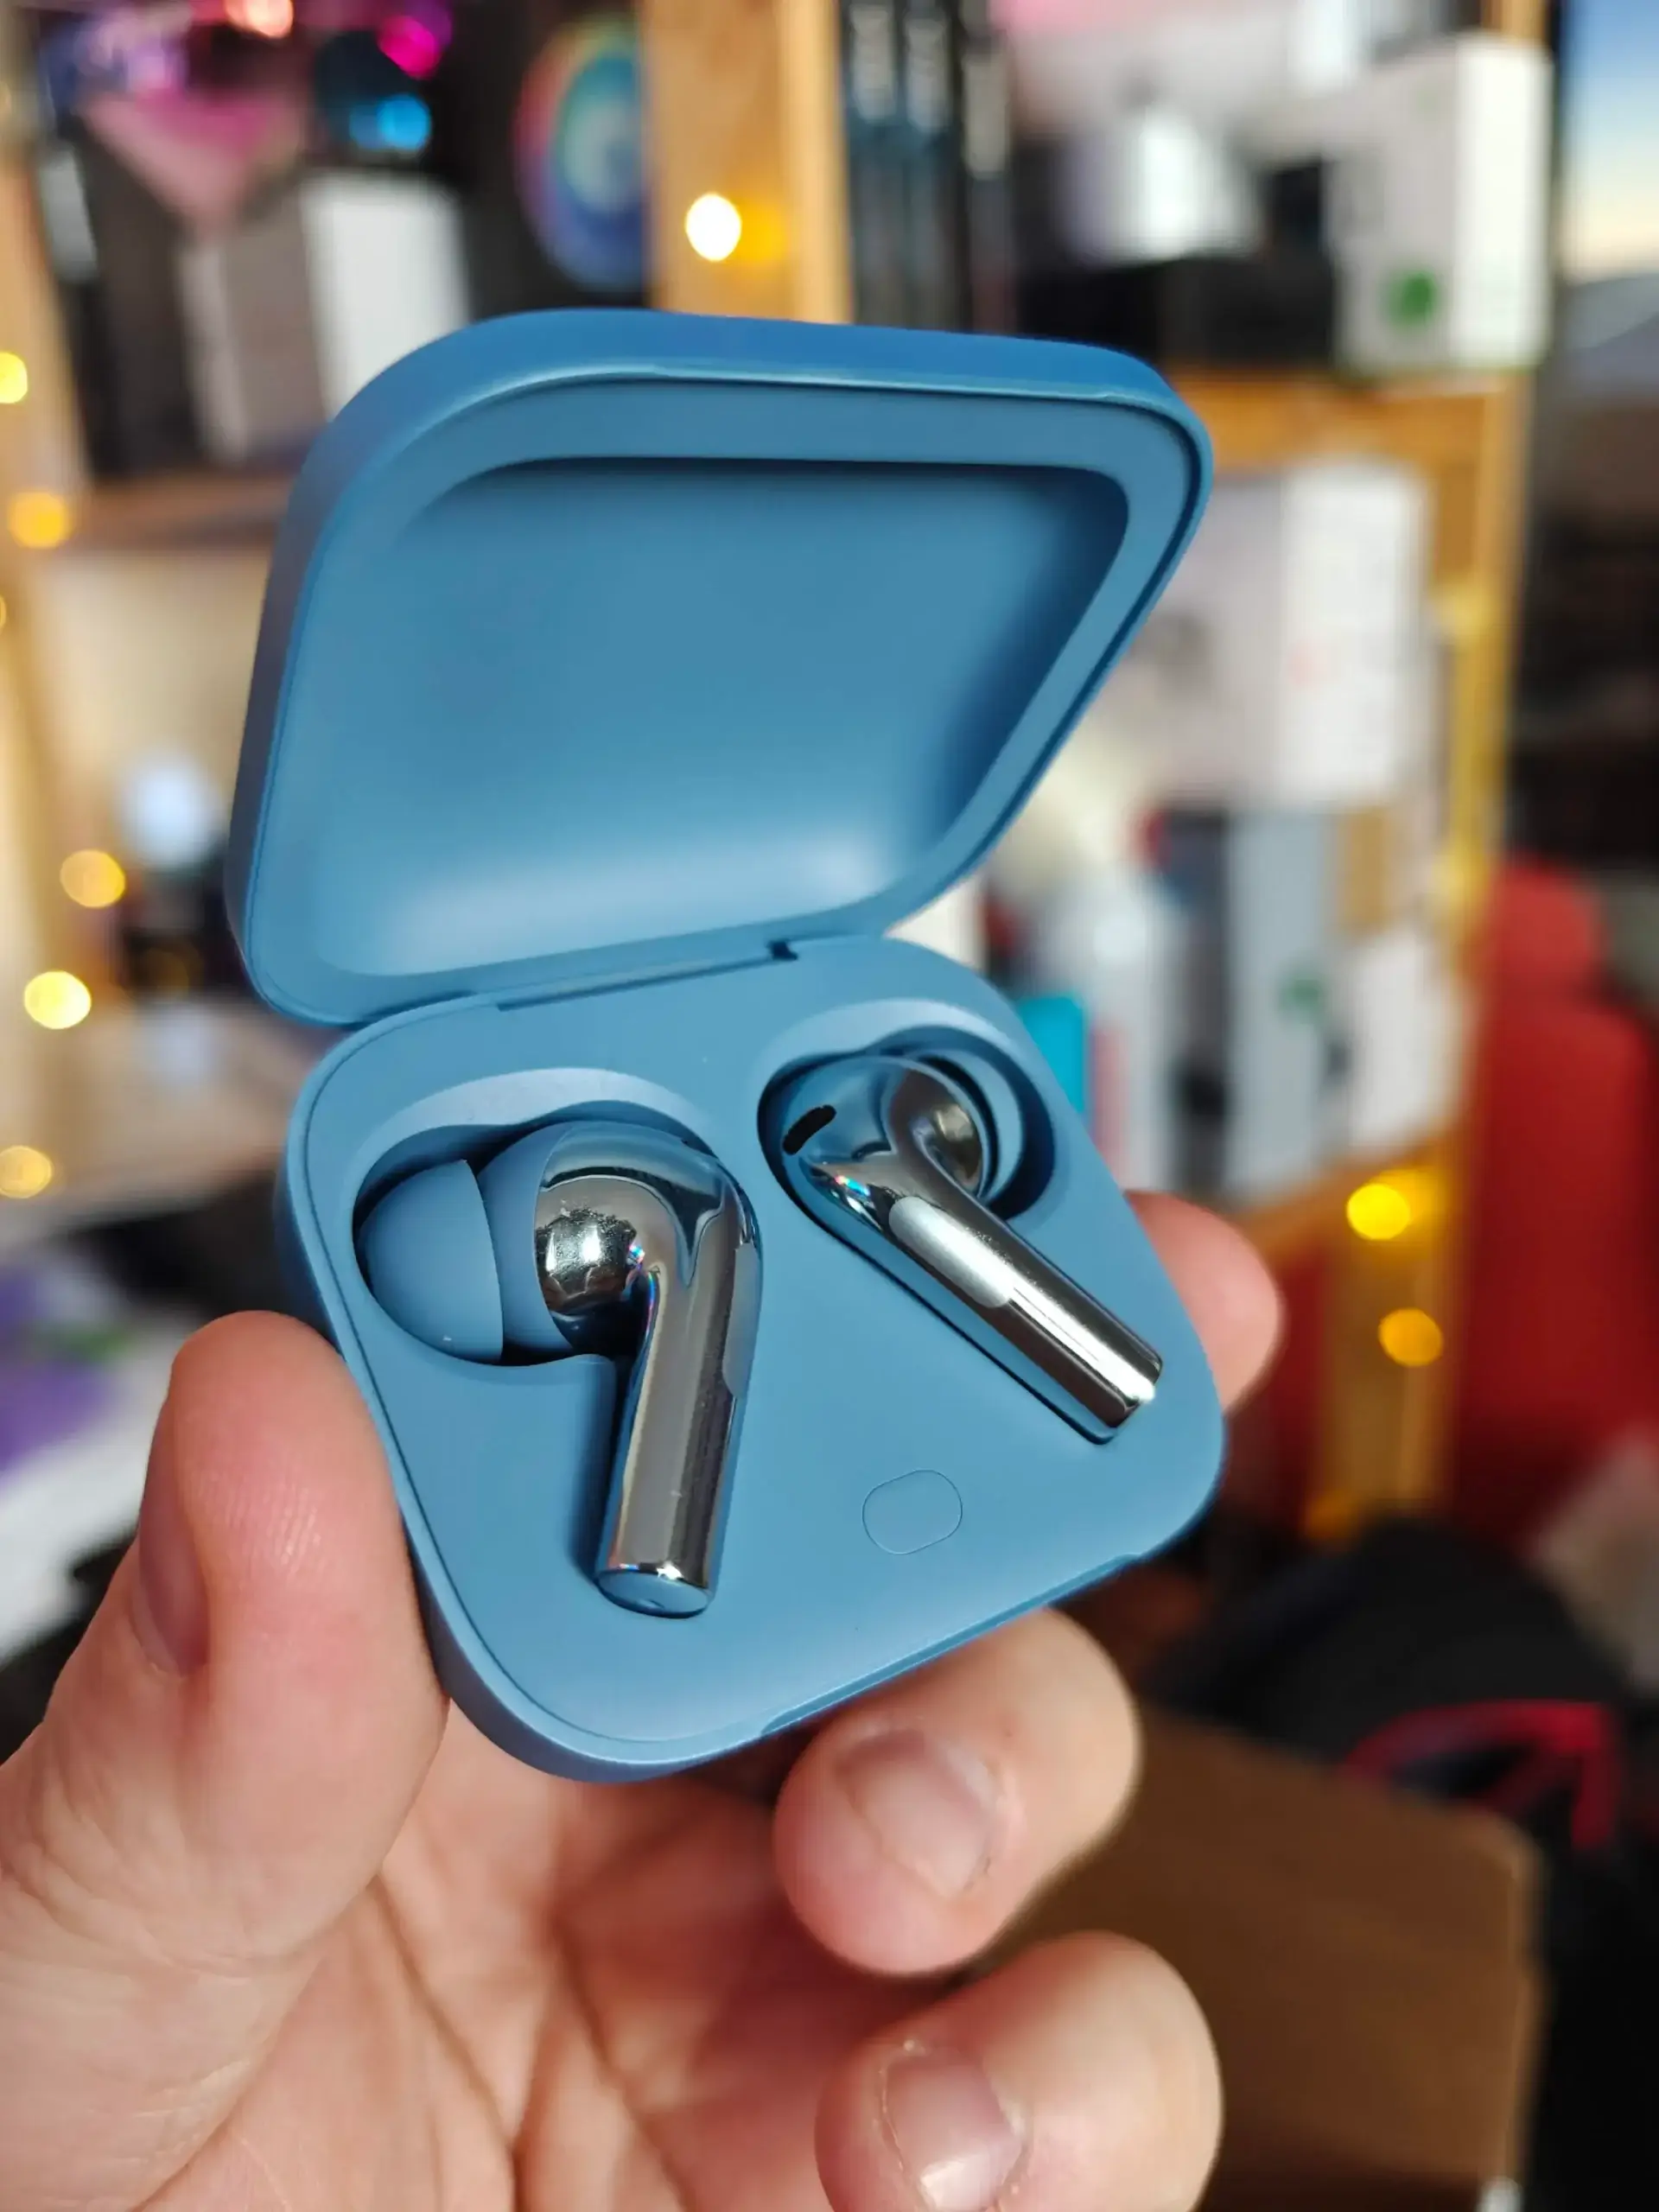 OnePlus Buds 3 earbuds with noise cancellation